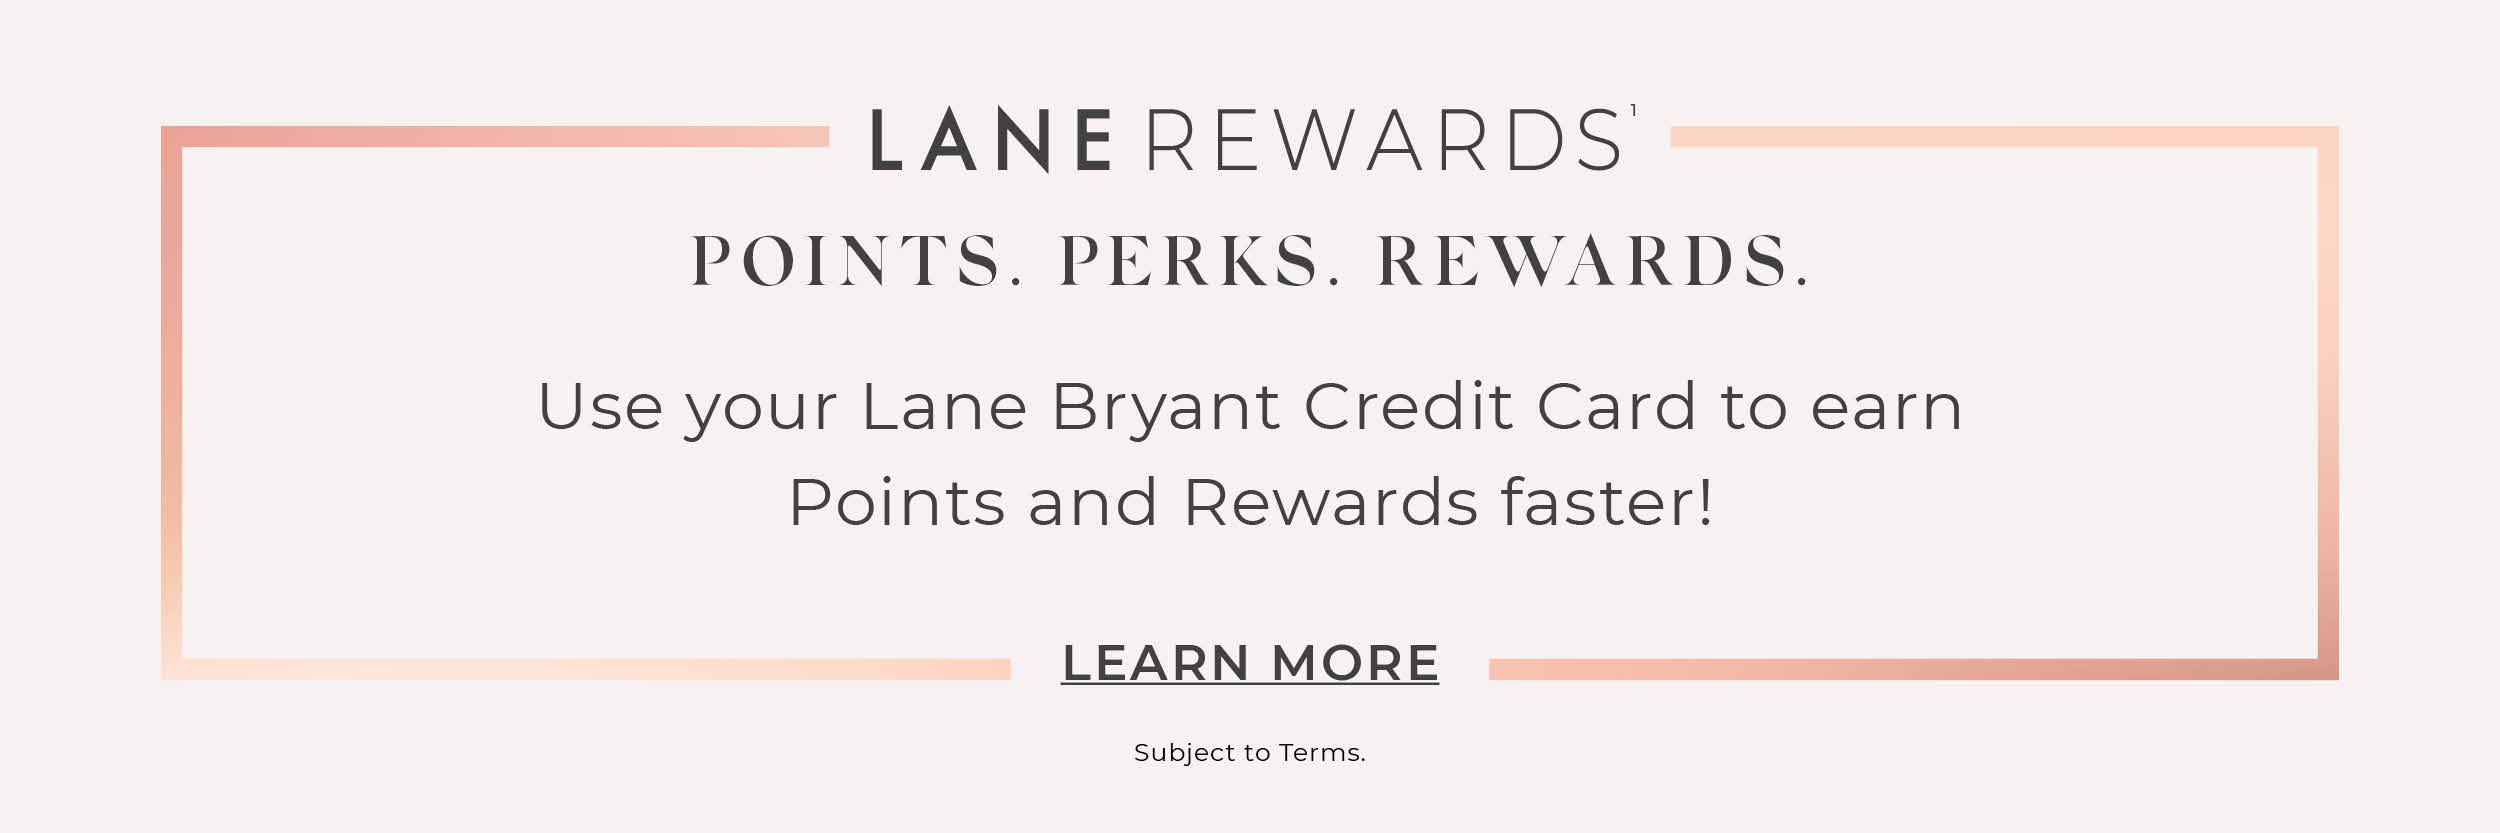 Use your Lane Bryant Credit Card to earn Points and Rewards Faster when you join Lane Rewards. Select to Learn More.